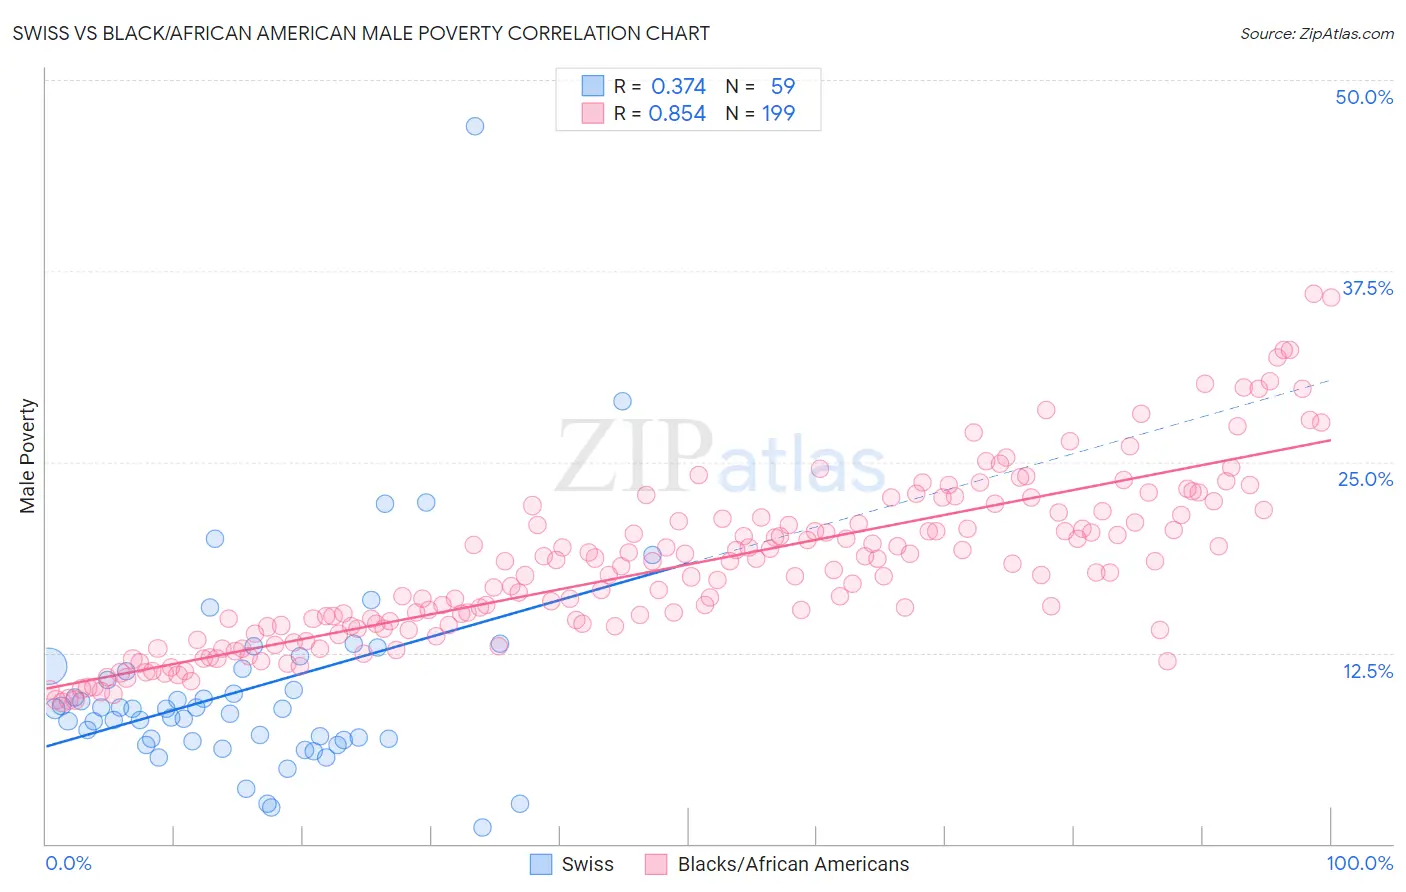 Swiss vs Black/African American Male Poverty